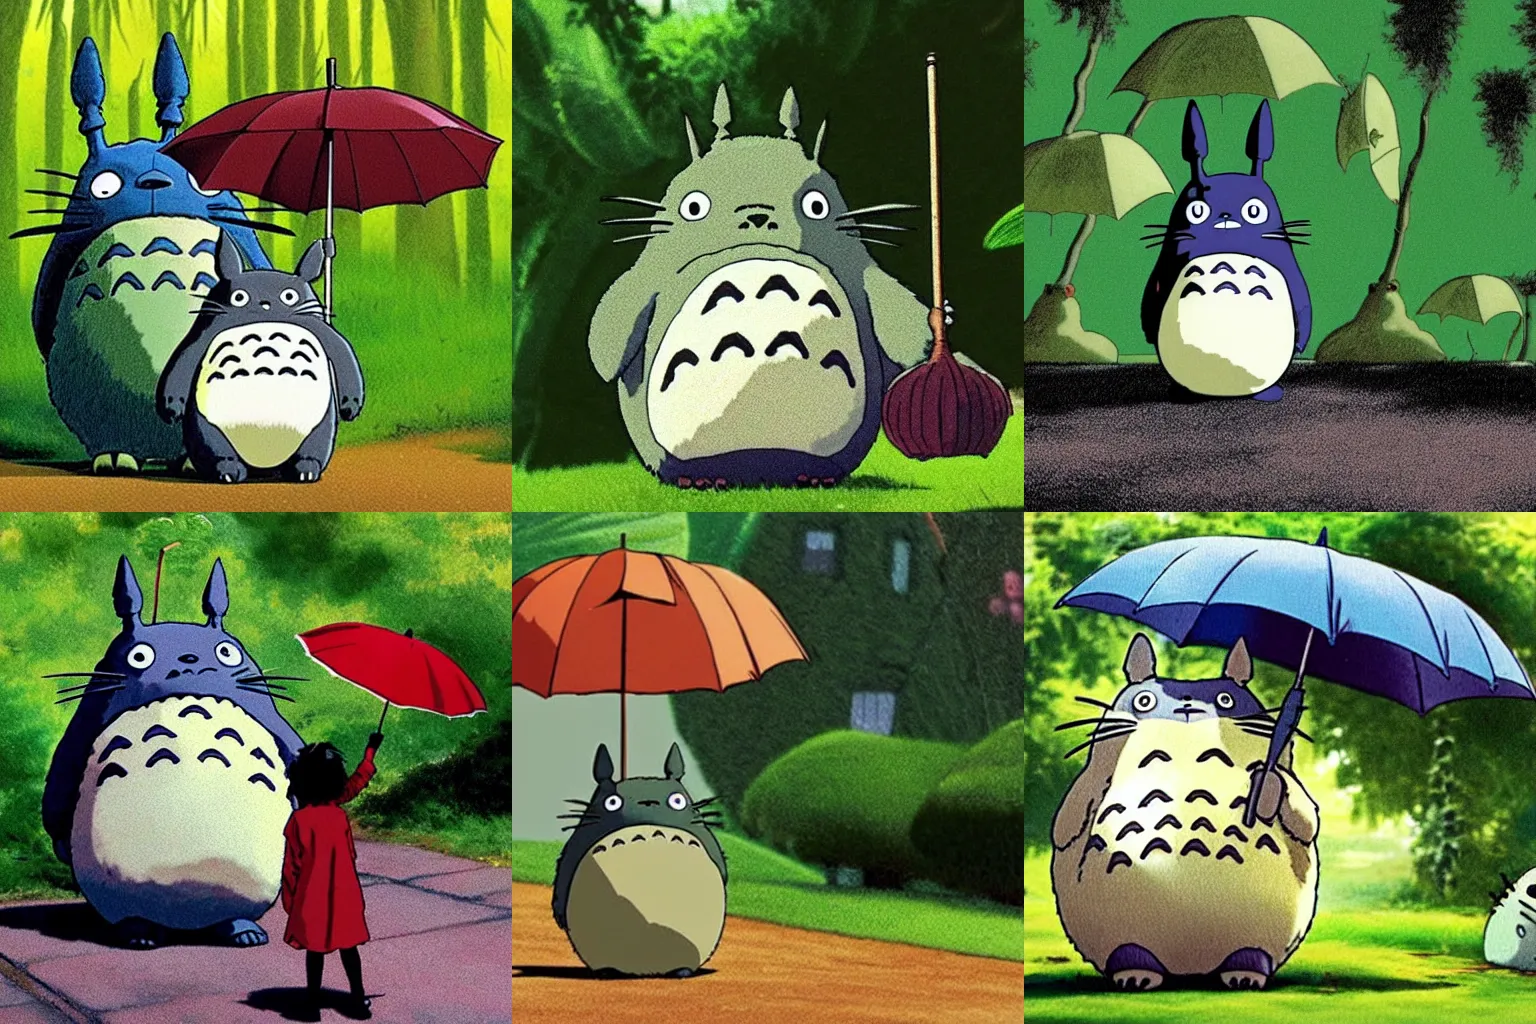 Prompt: totoro from the movie my neighbor totoro standing under a large leaf that is being used as an umbrella